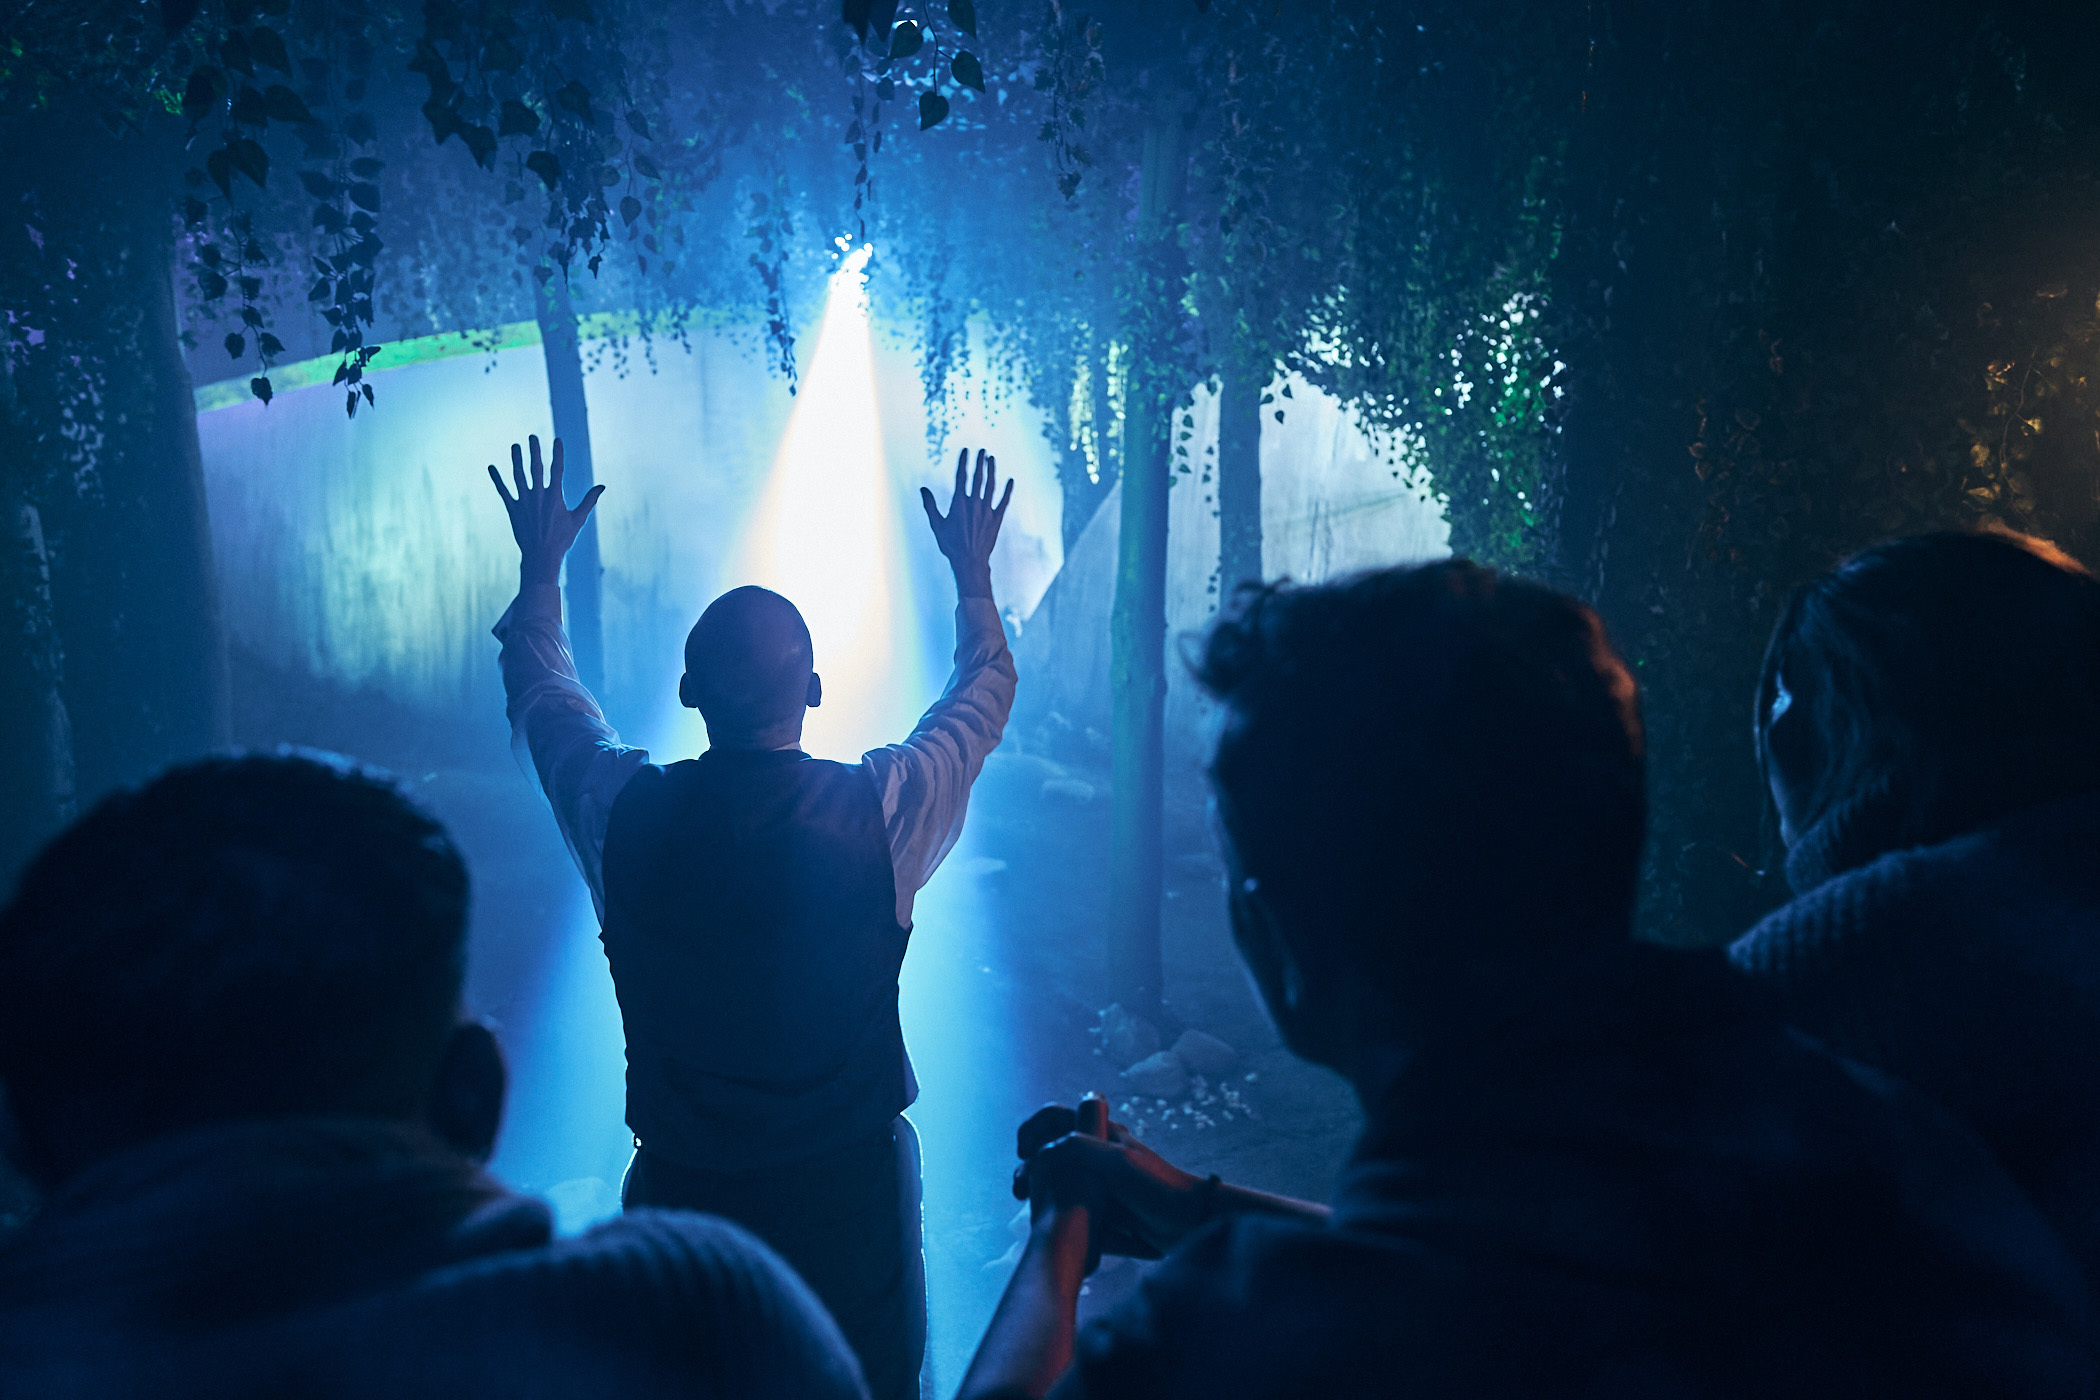 Must-try immersive experiences in London - Jeff Wayne’s The War of the Worlds - The Immersive Experience - theatrical set with beam of light shining down on man holding up his hands